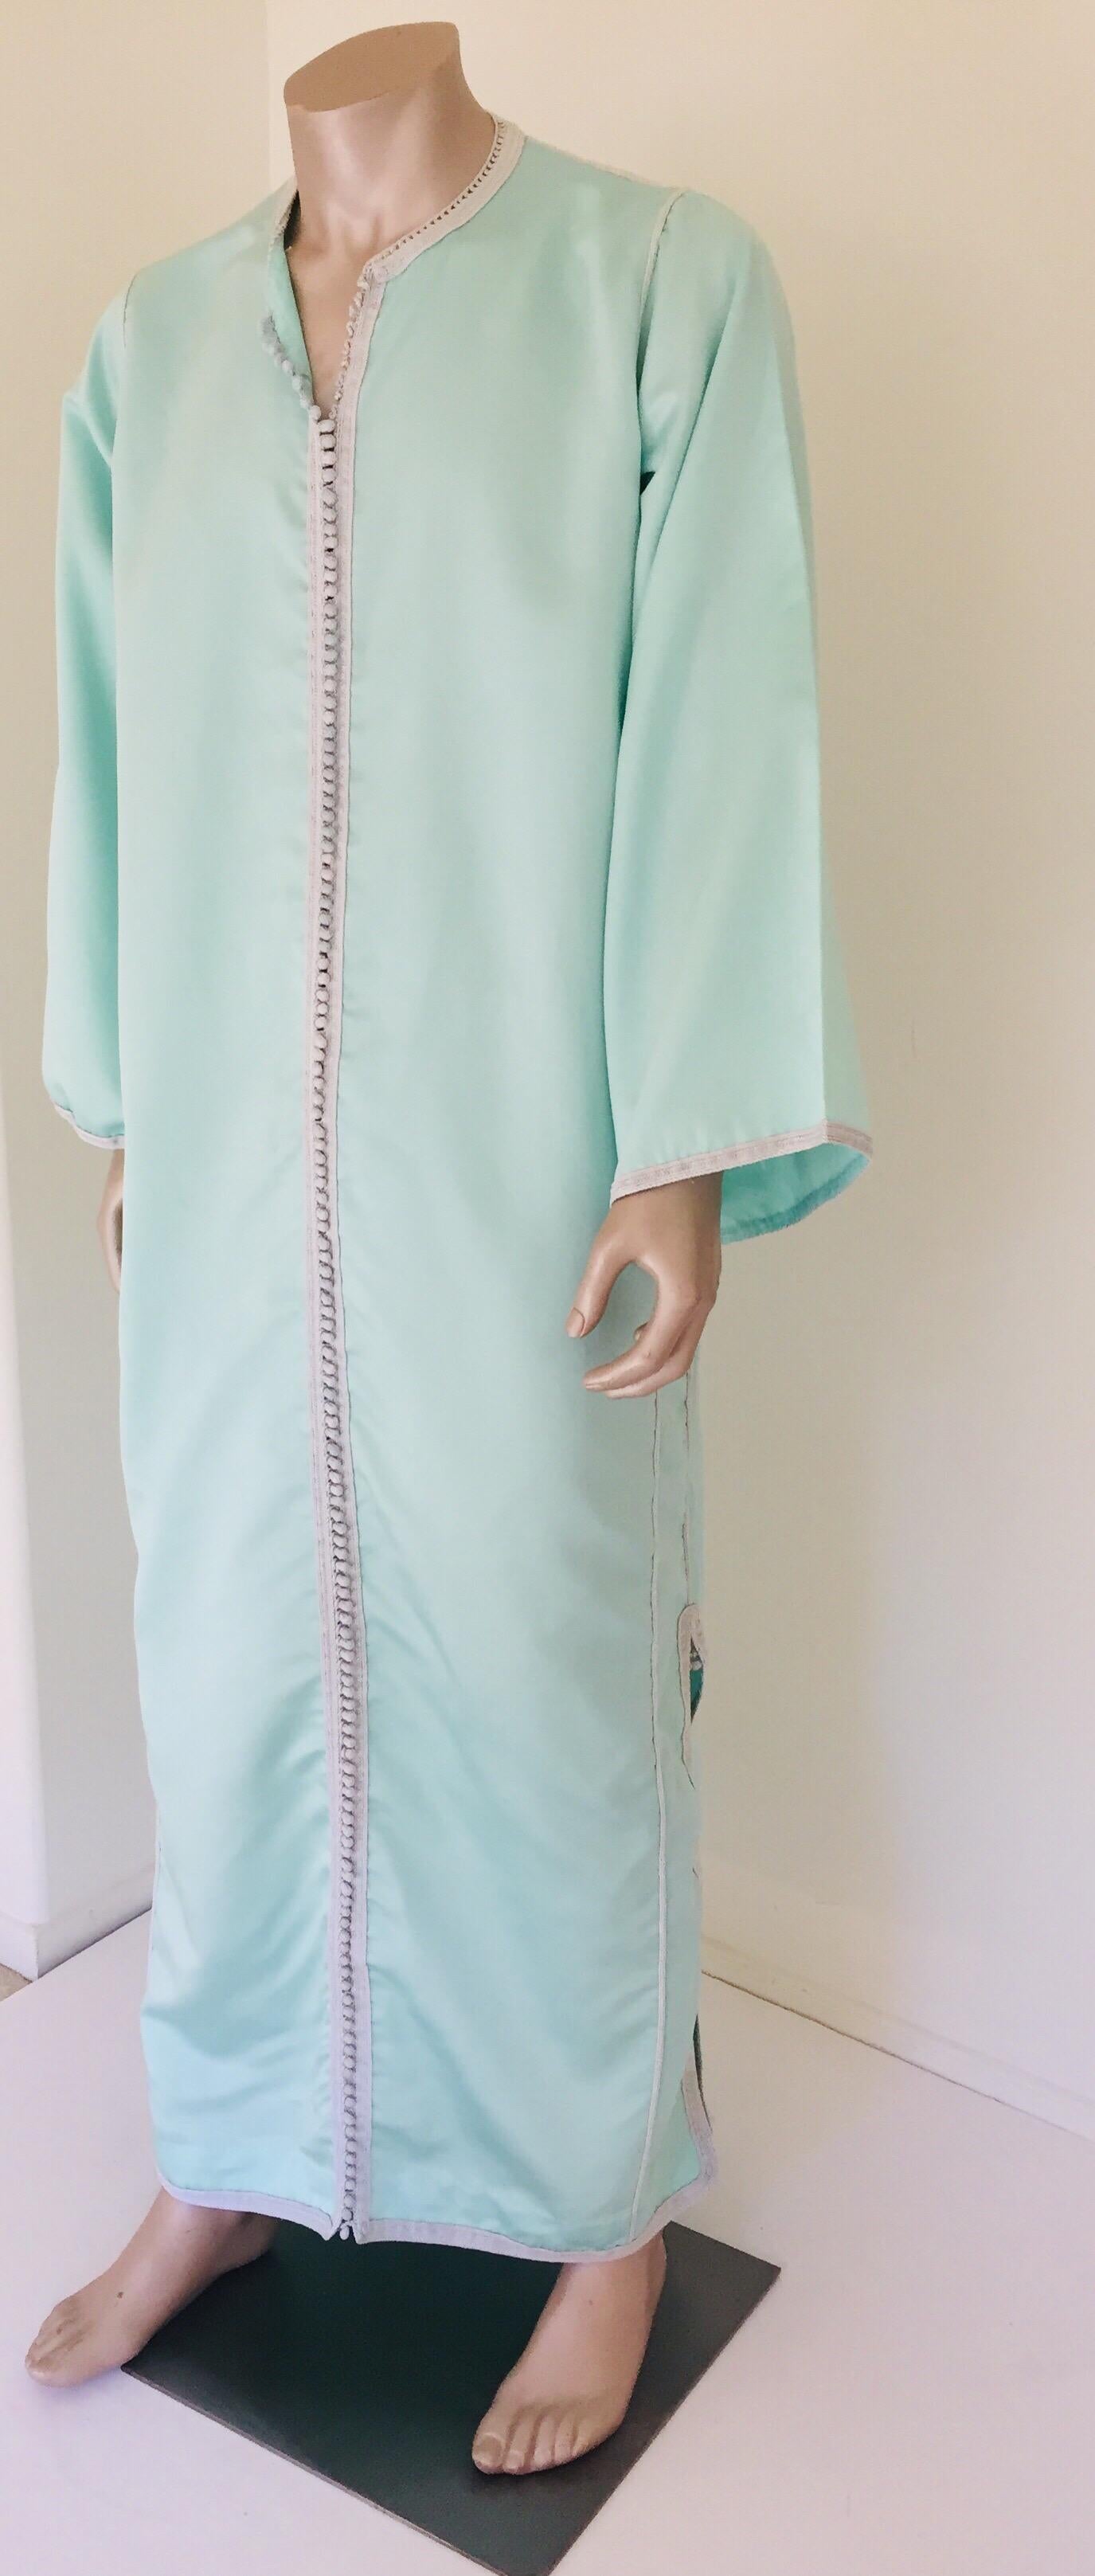 Moorish Turquoise Blue 1970s Maxi Dress Caftan In Good Condition For Sale In North Hollywood, CA